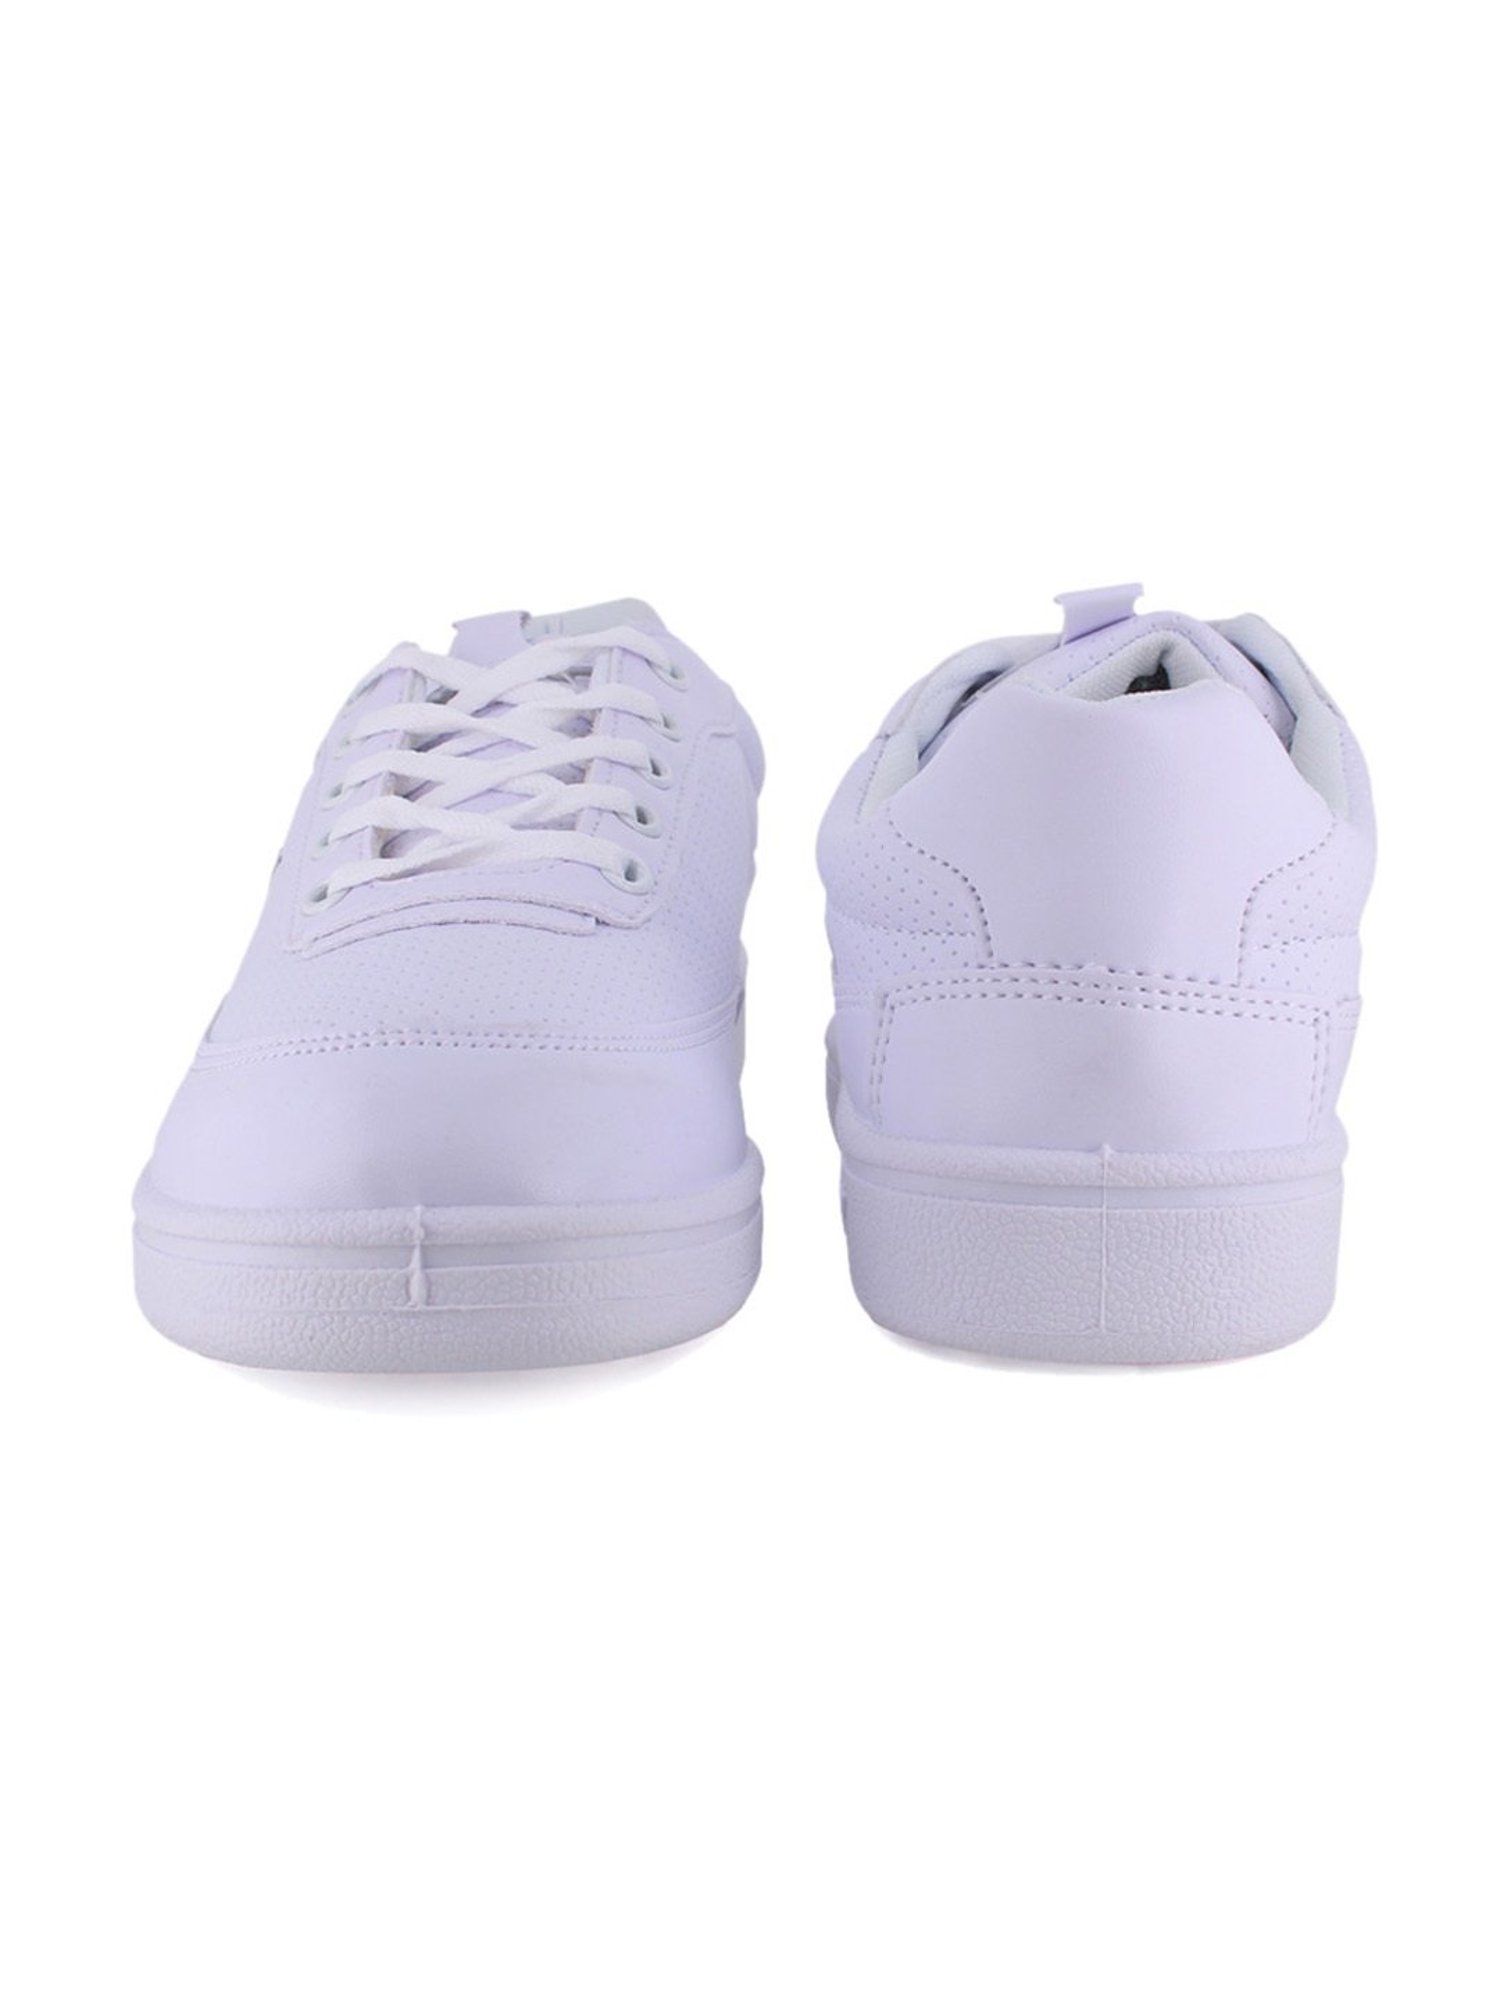 Trainers Calvin Klein White size 41 EU in Polyester - 39184009